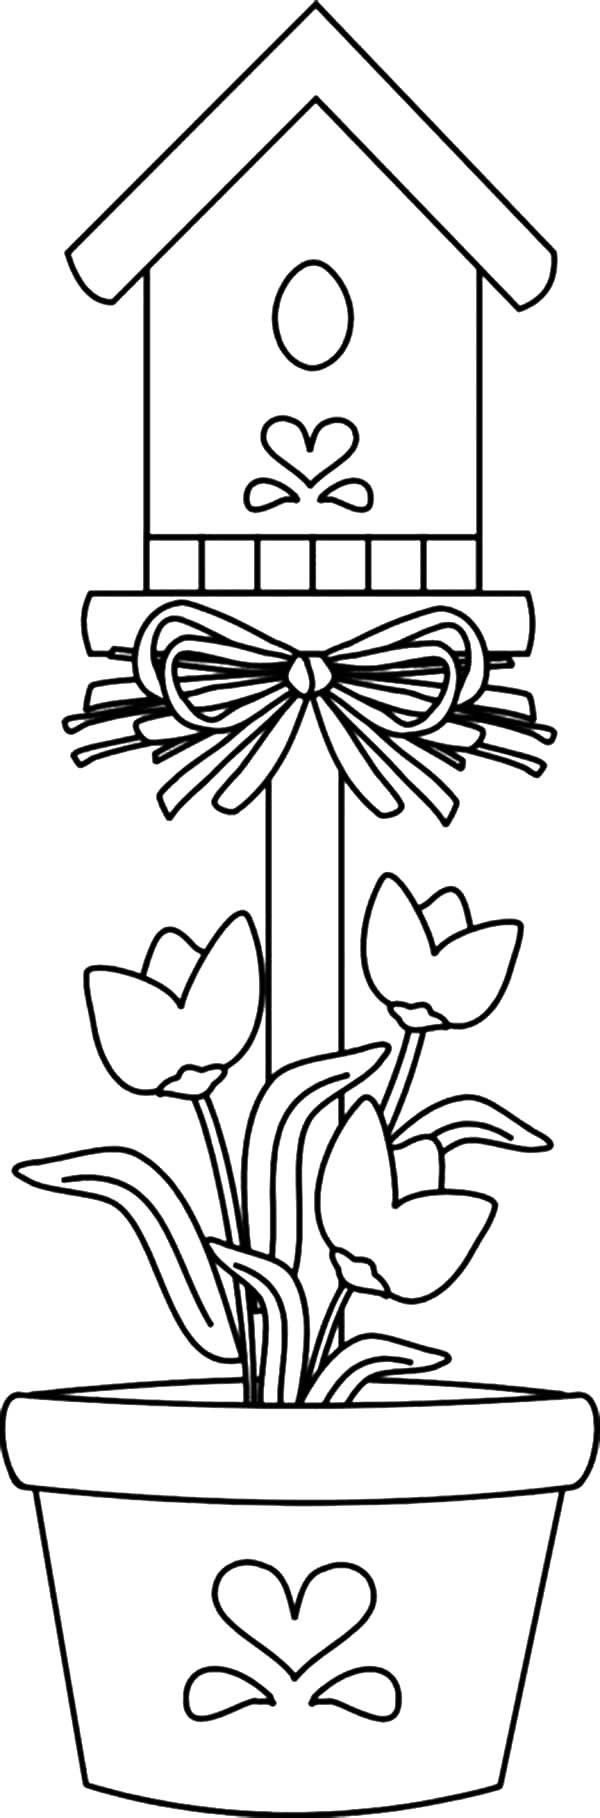 Free Birdhouse Coloring Page, Download Free Birdhouse Coloring ...